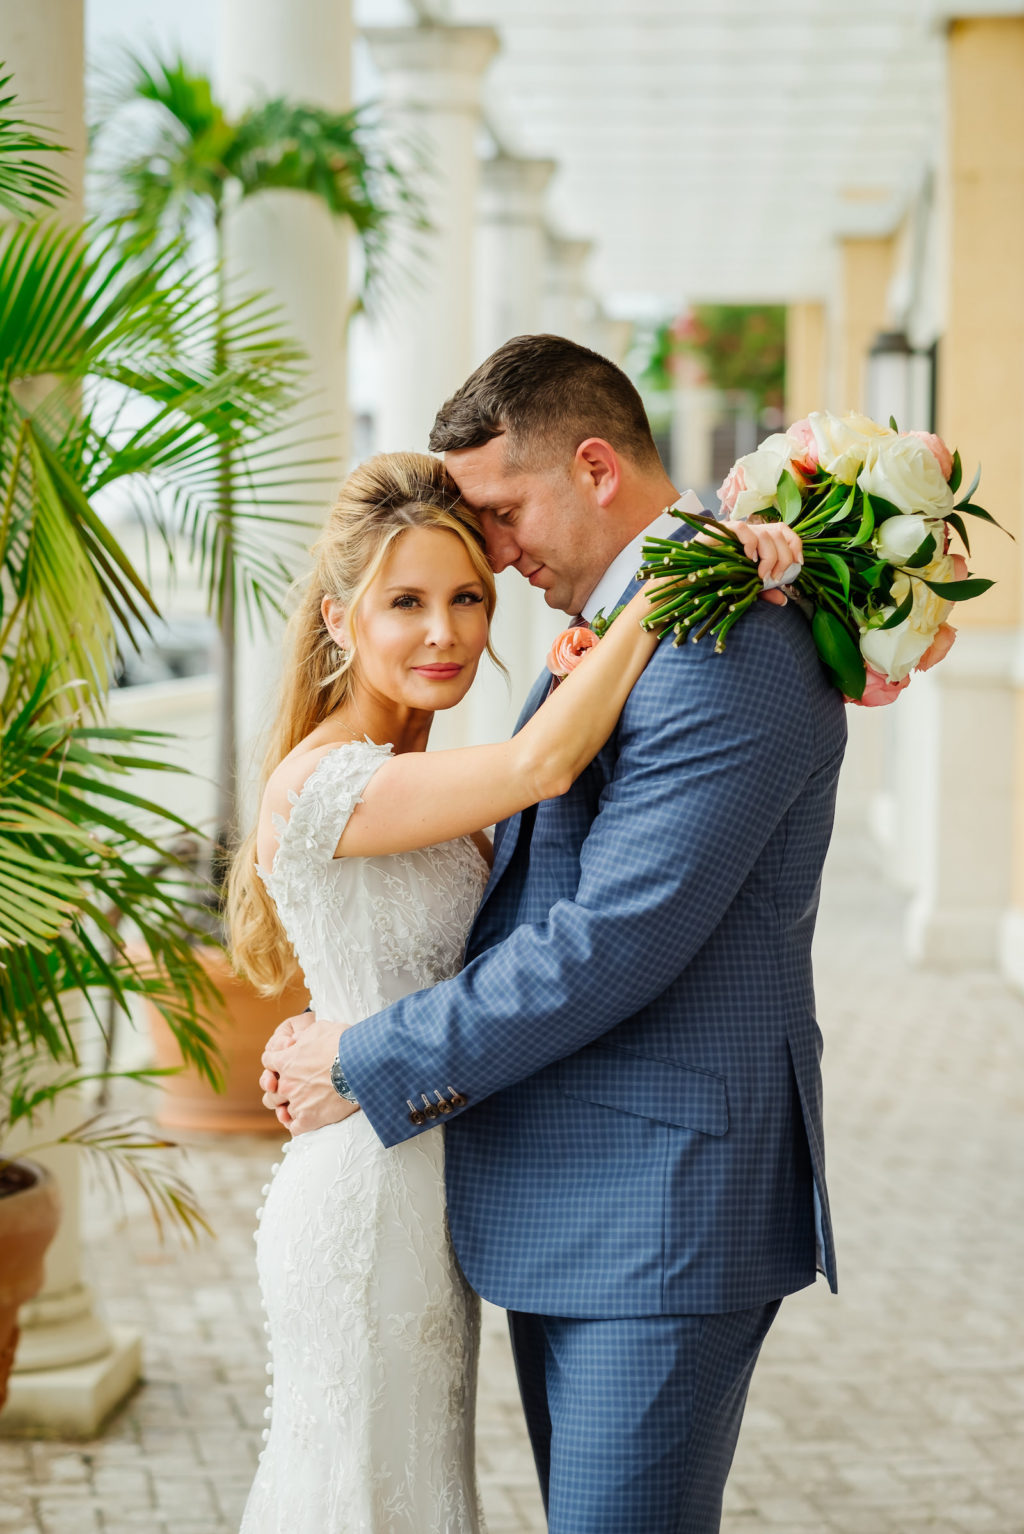 Tampa Bride in Romantic Lace Wedding Dress and Groom in Blue Suit